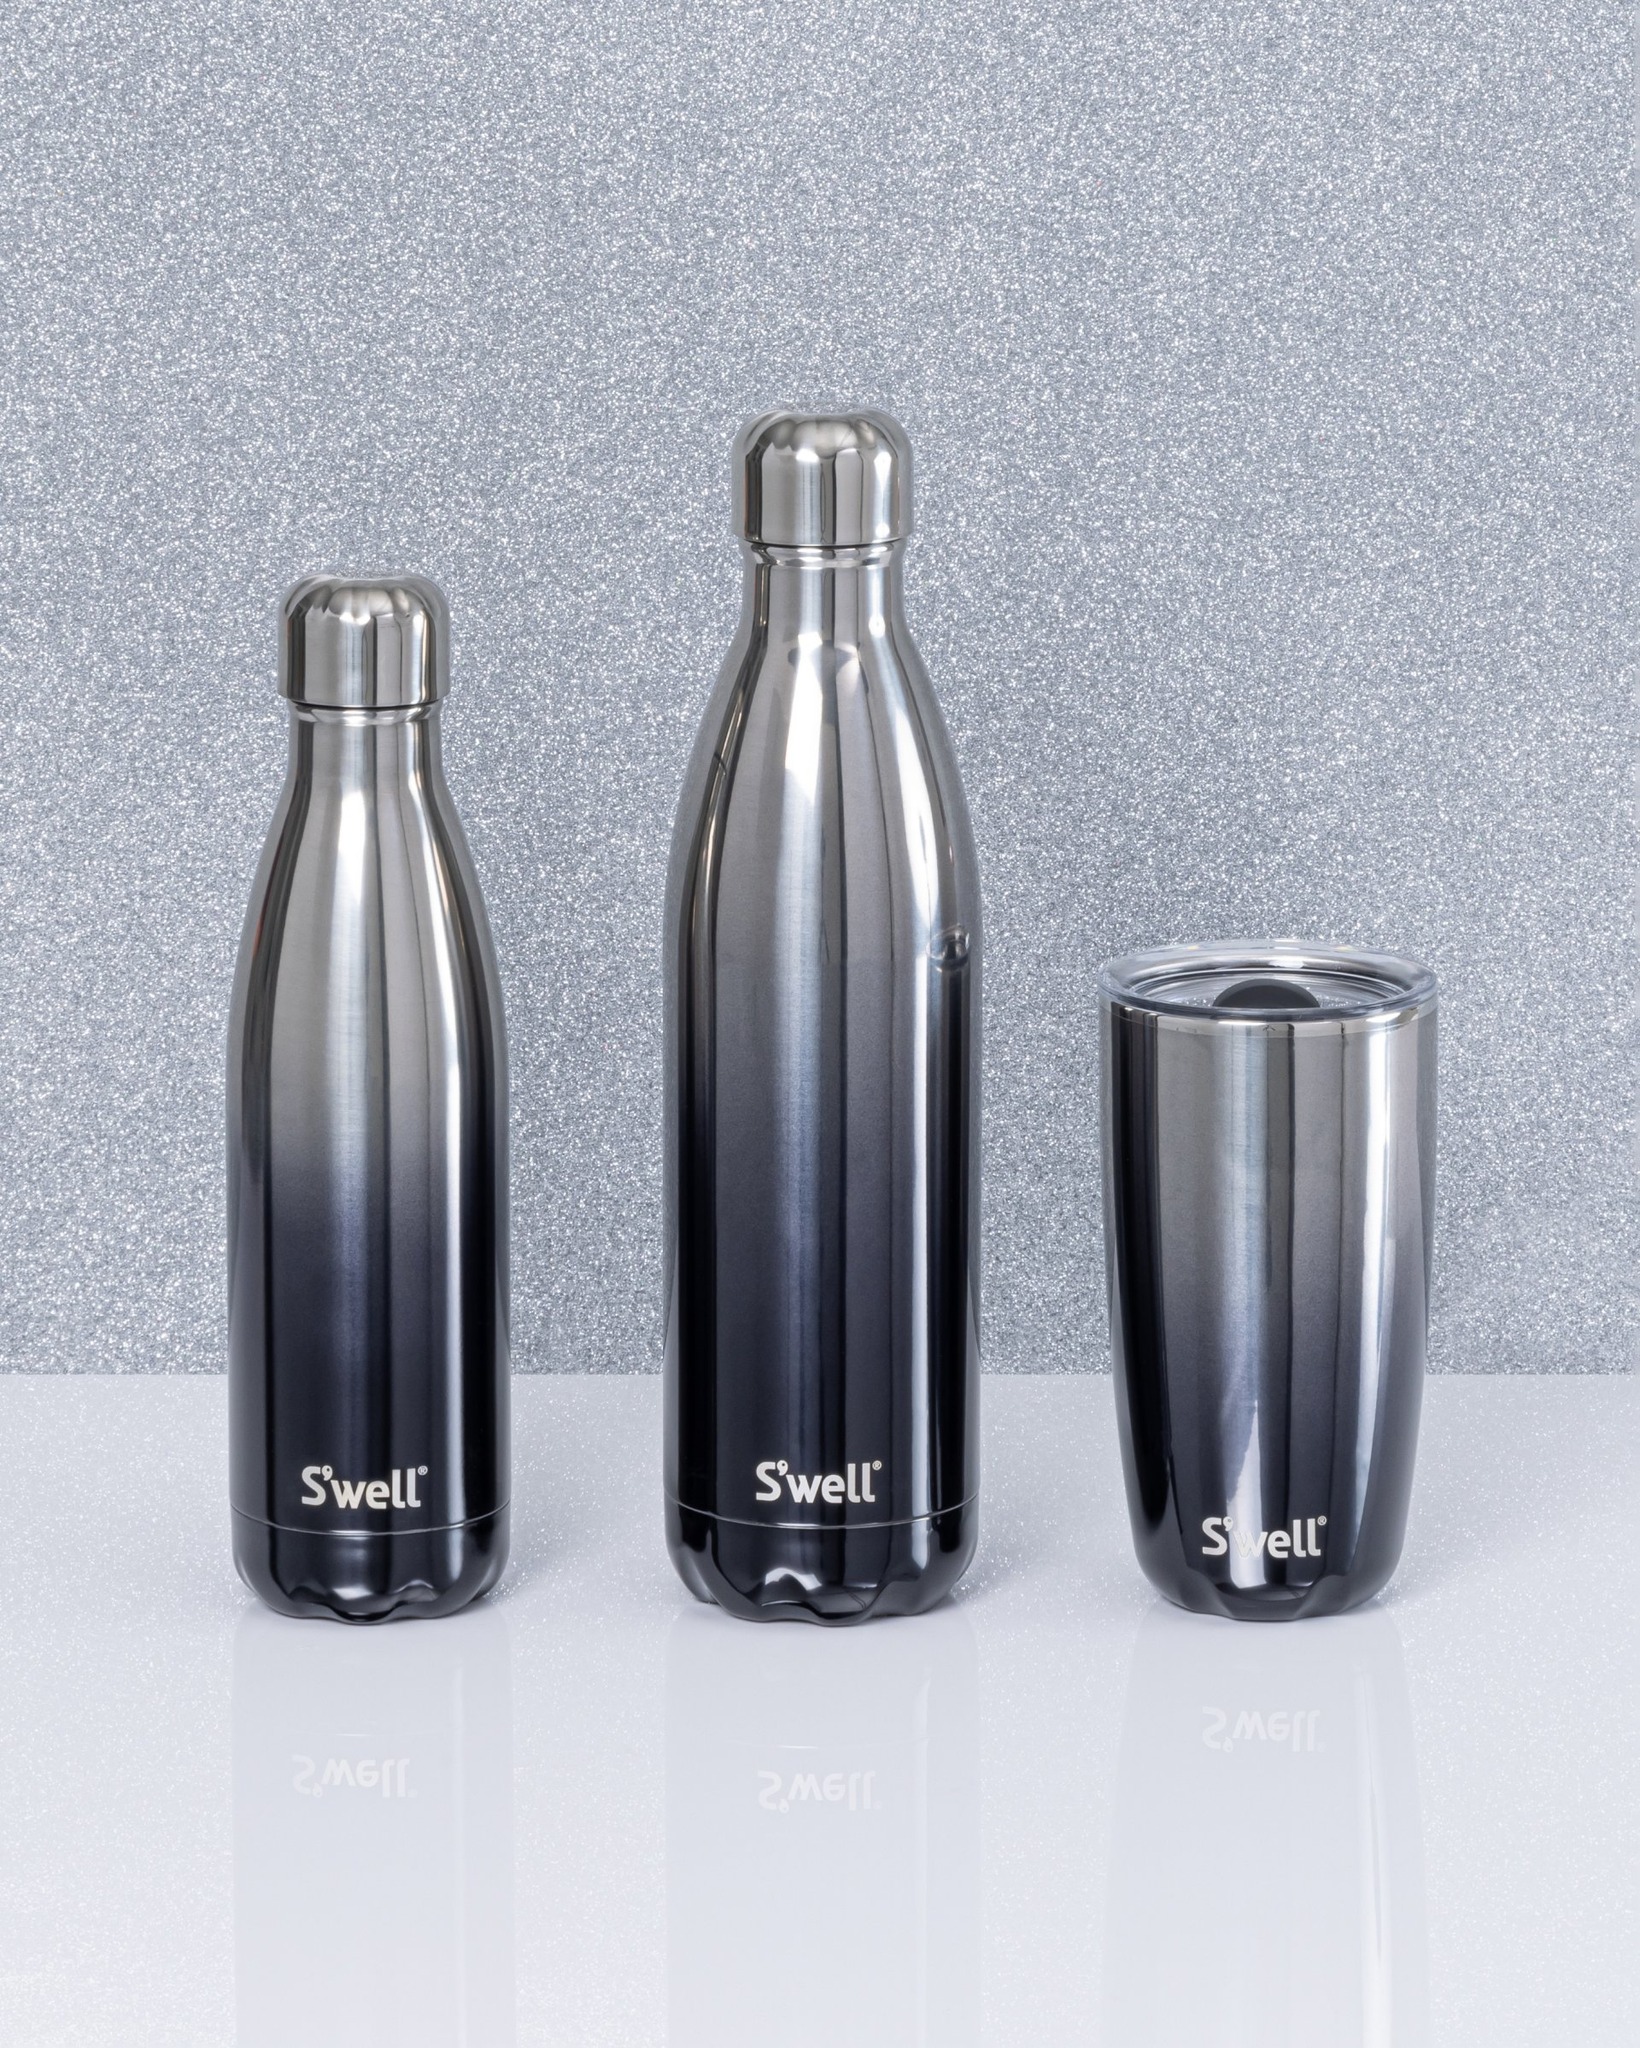 Three different sizes of S'Well water bottles are arranged side by side. They are all the same black to silver ombre design.